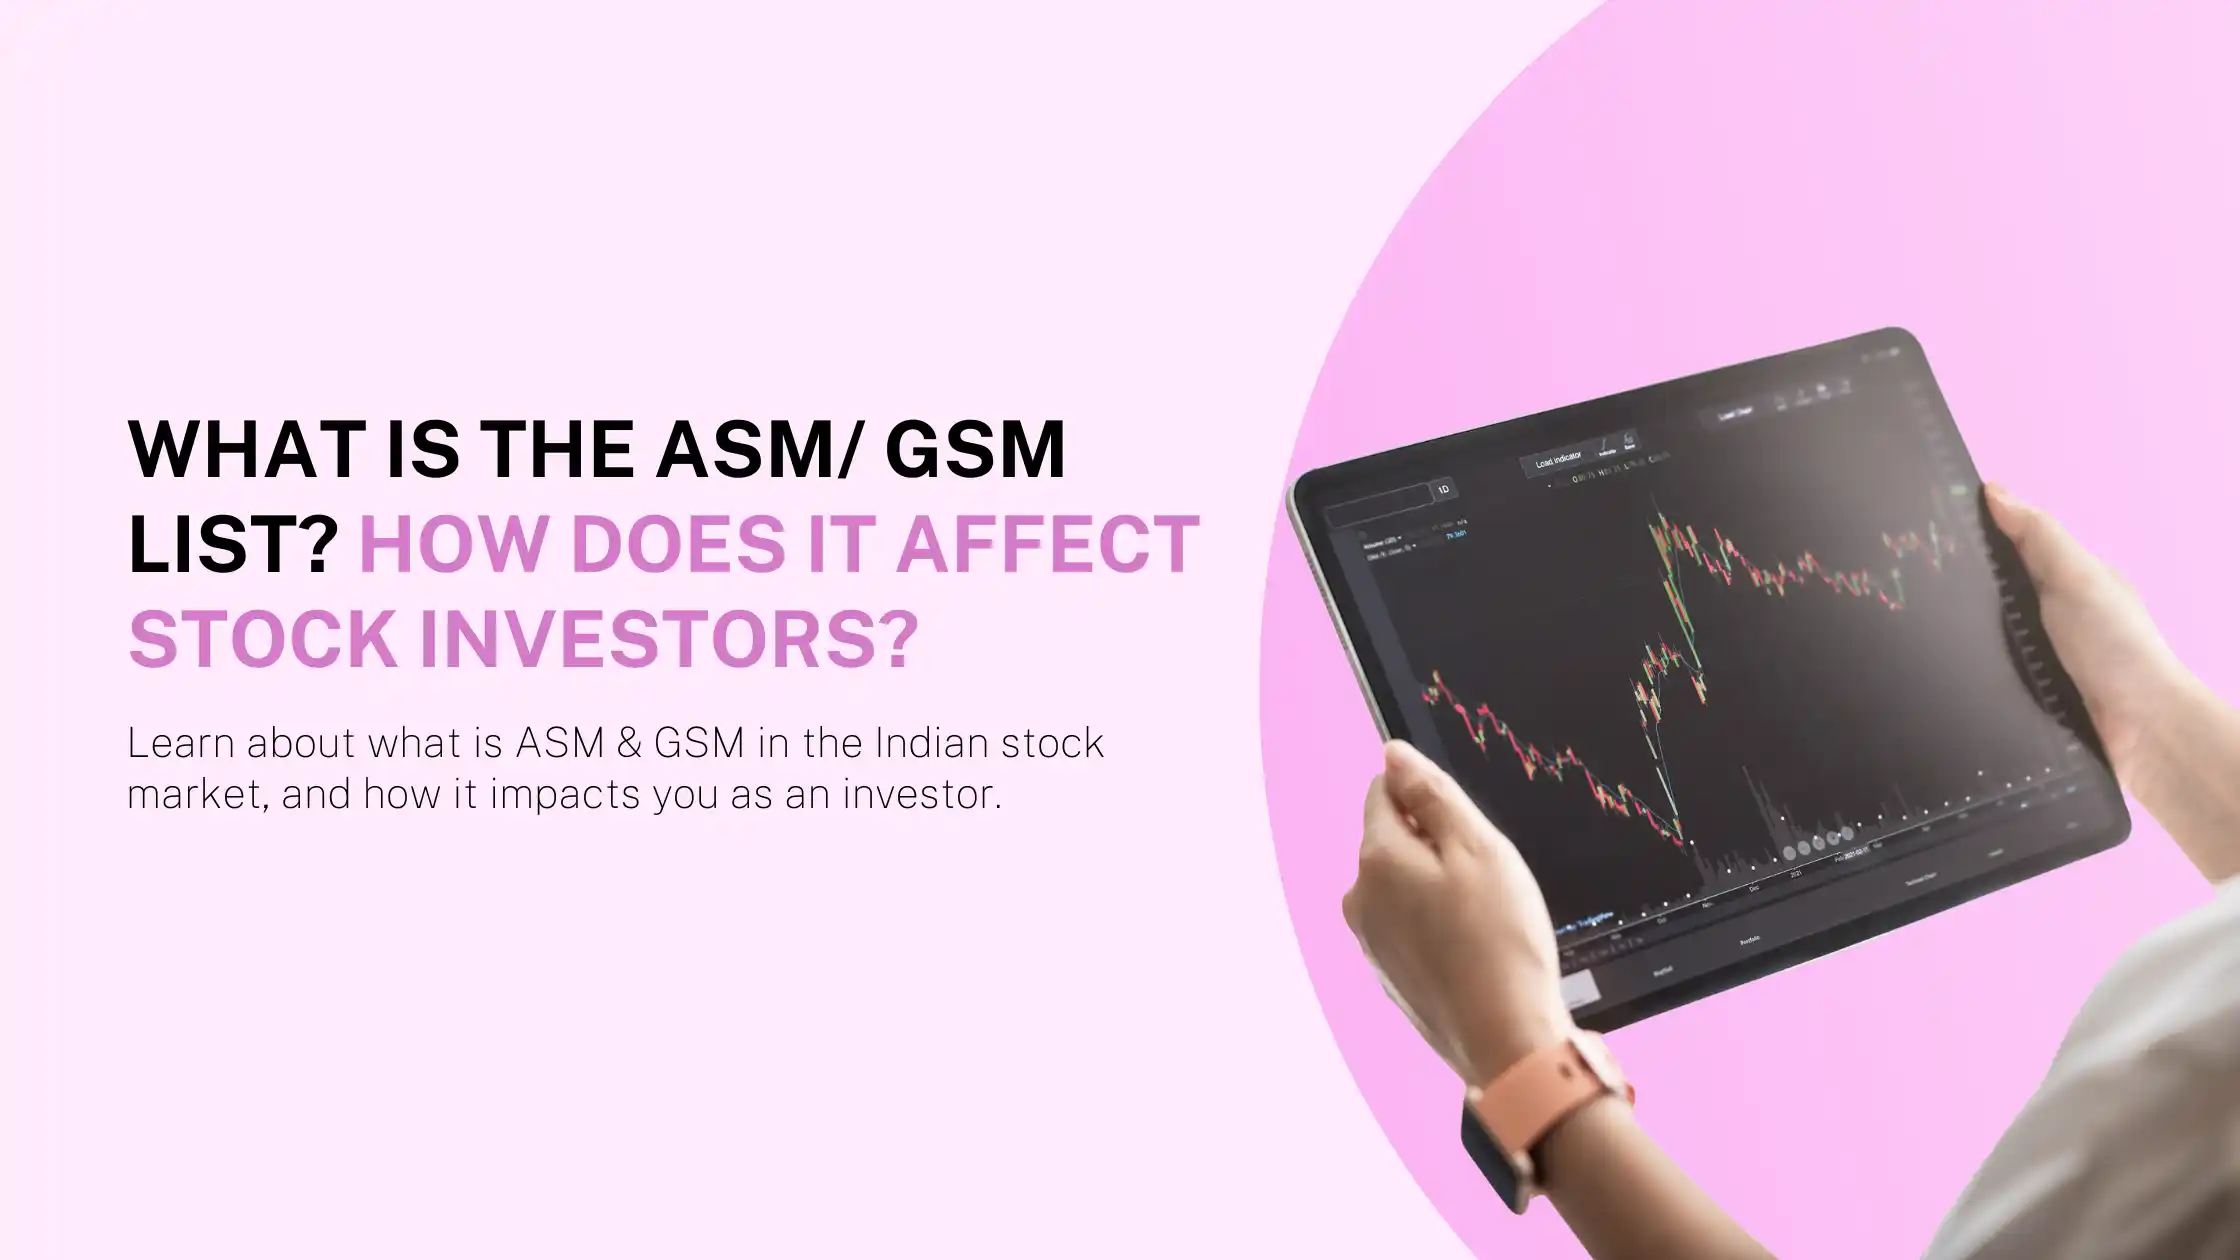 What is the ASM/ GSM List and How Does It Affect Stock Investors?